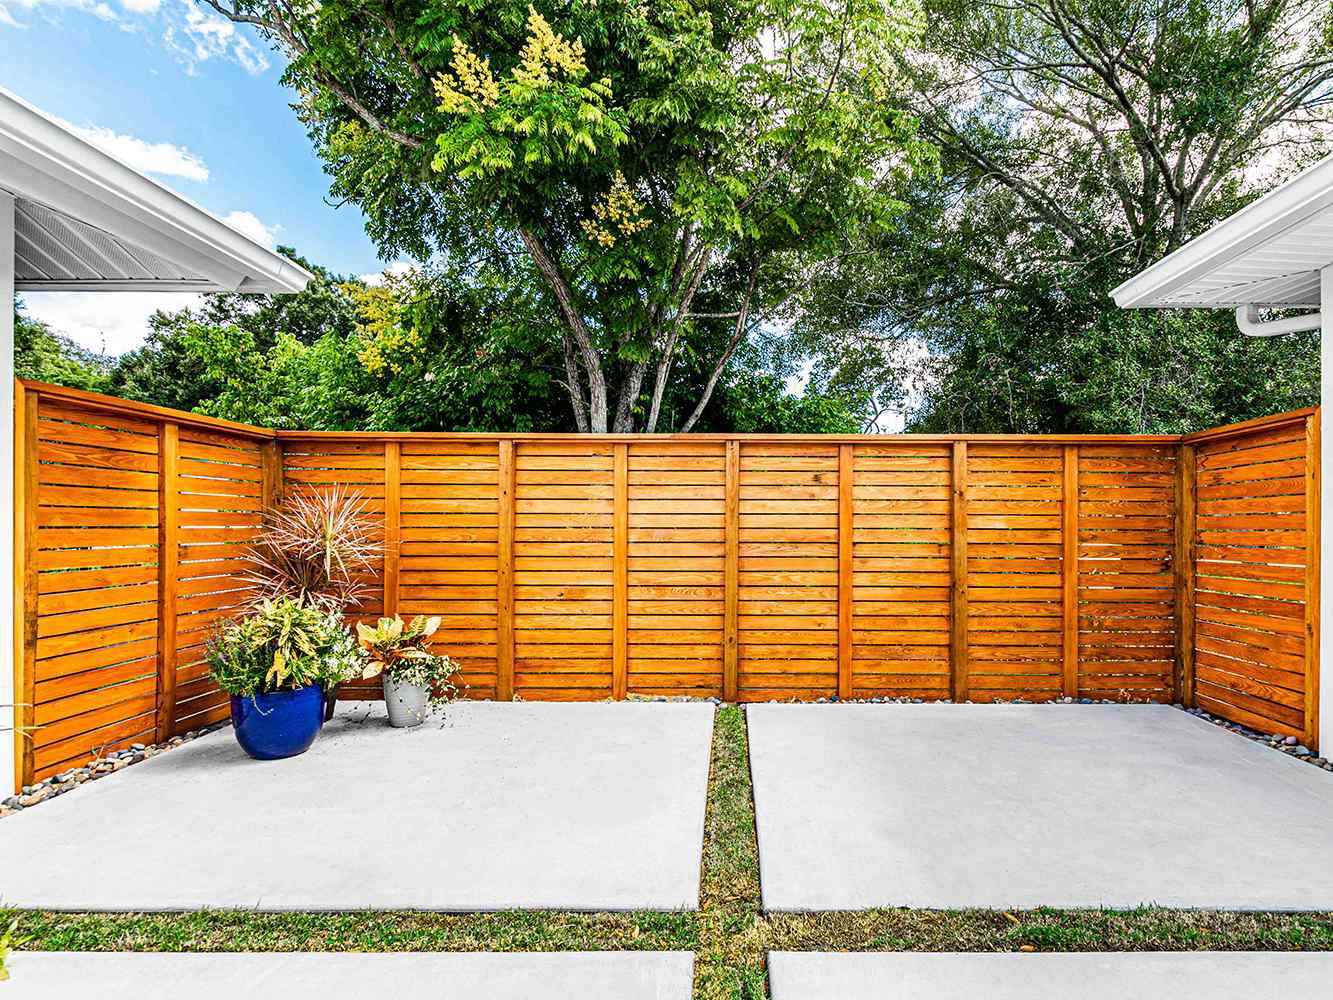 Photo of a pre-stained Florida wood fence